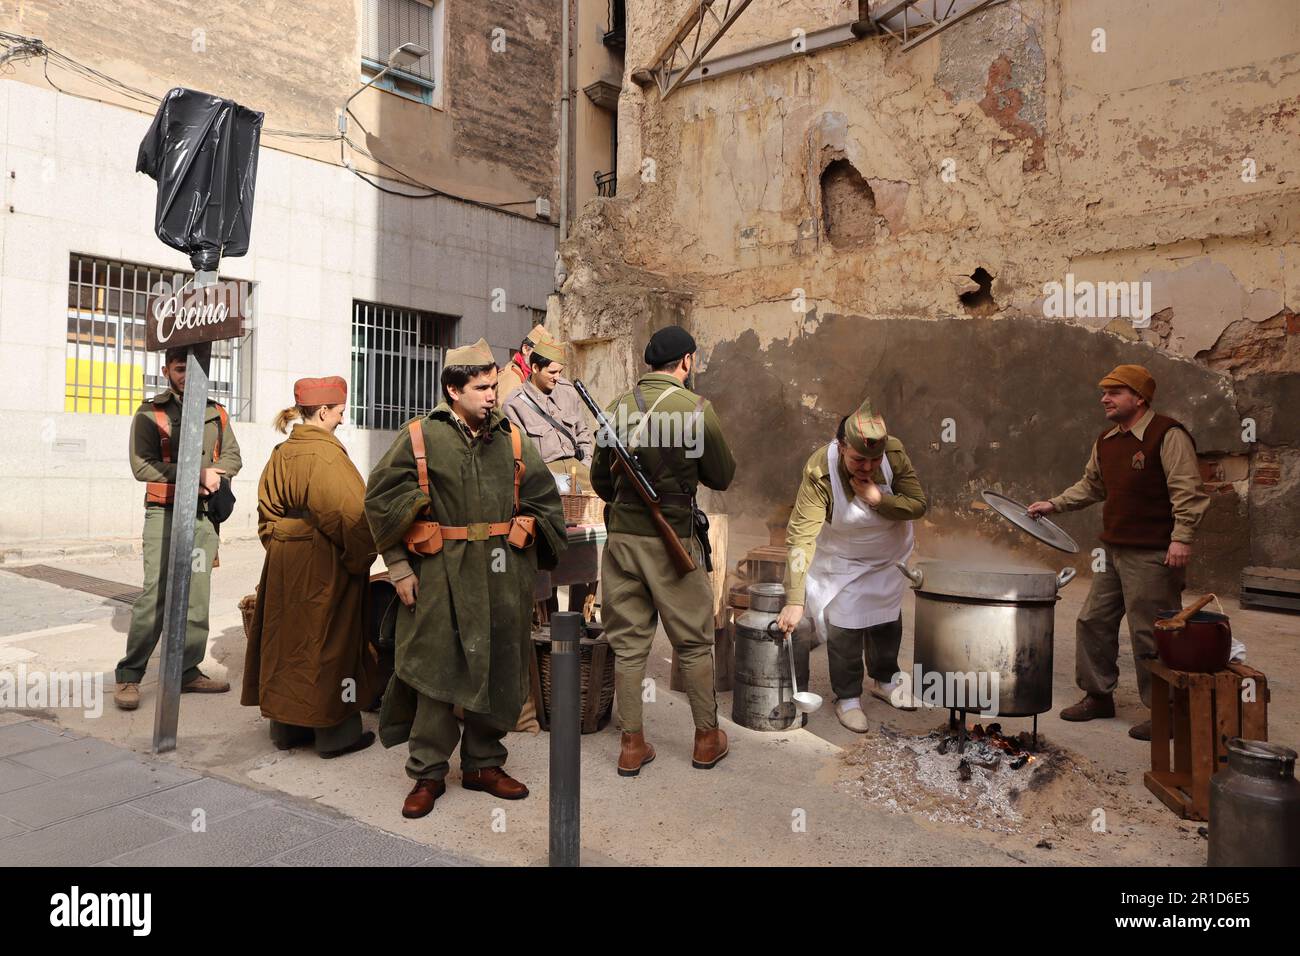 Spanish Civil War reenactment. Living historians recreate a kitchen at the rearguard, with cooks and soldiers. Hunger during war was lethal. Stock Photo